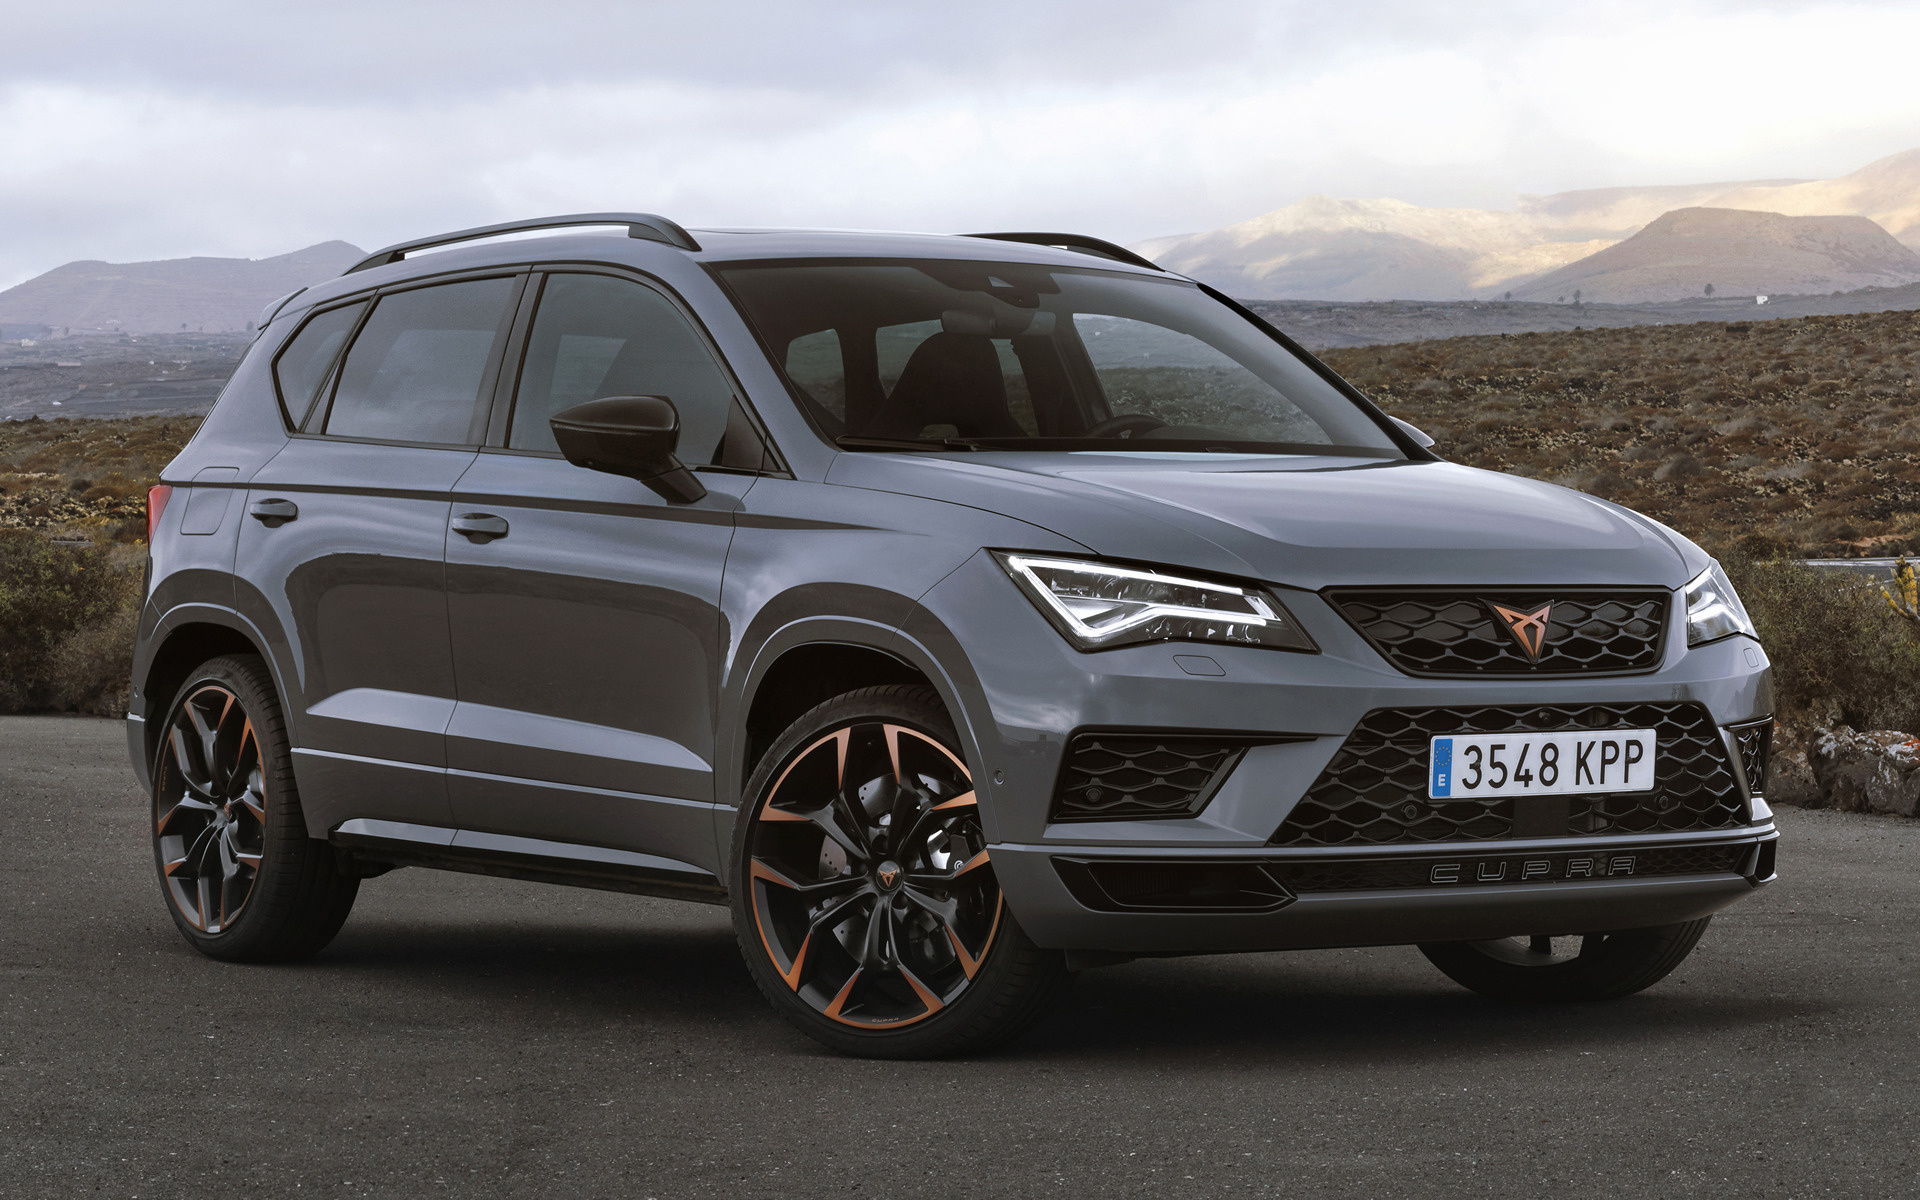 Seat Ateca limited edition, Wallpapers and HD images, Car Pixel, Car enthusiasts, 1920x1200 HD Desktop